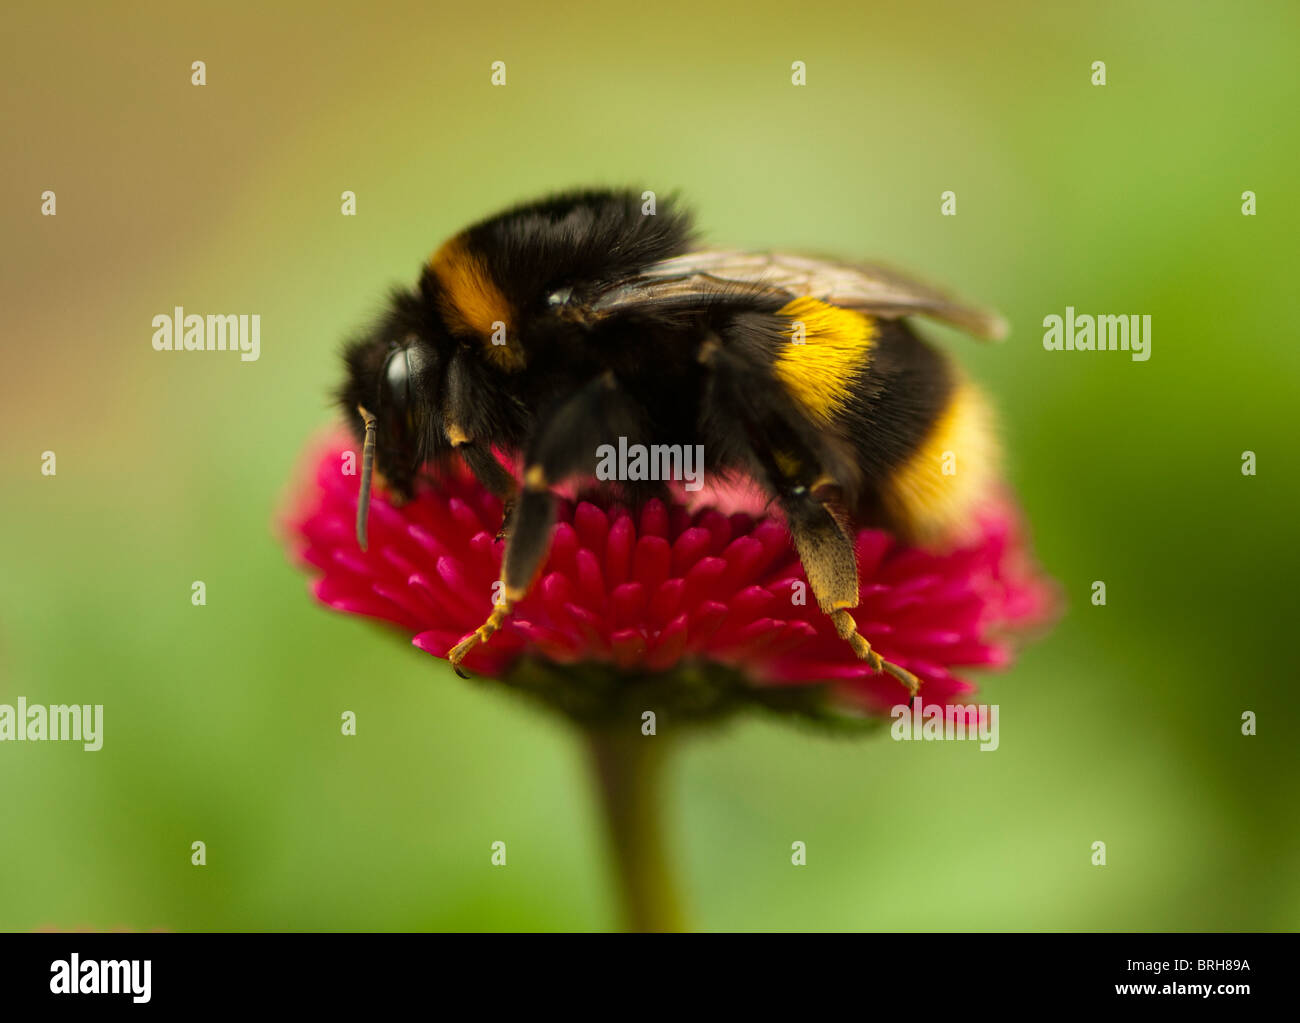 Bumble bee on pink flower Stock Photo